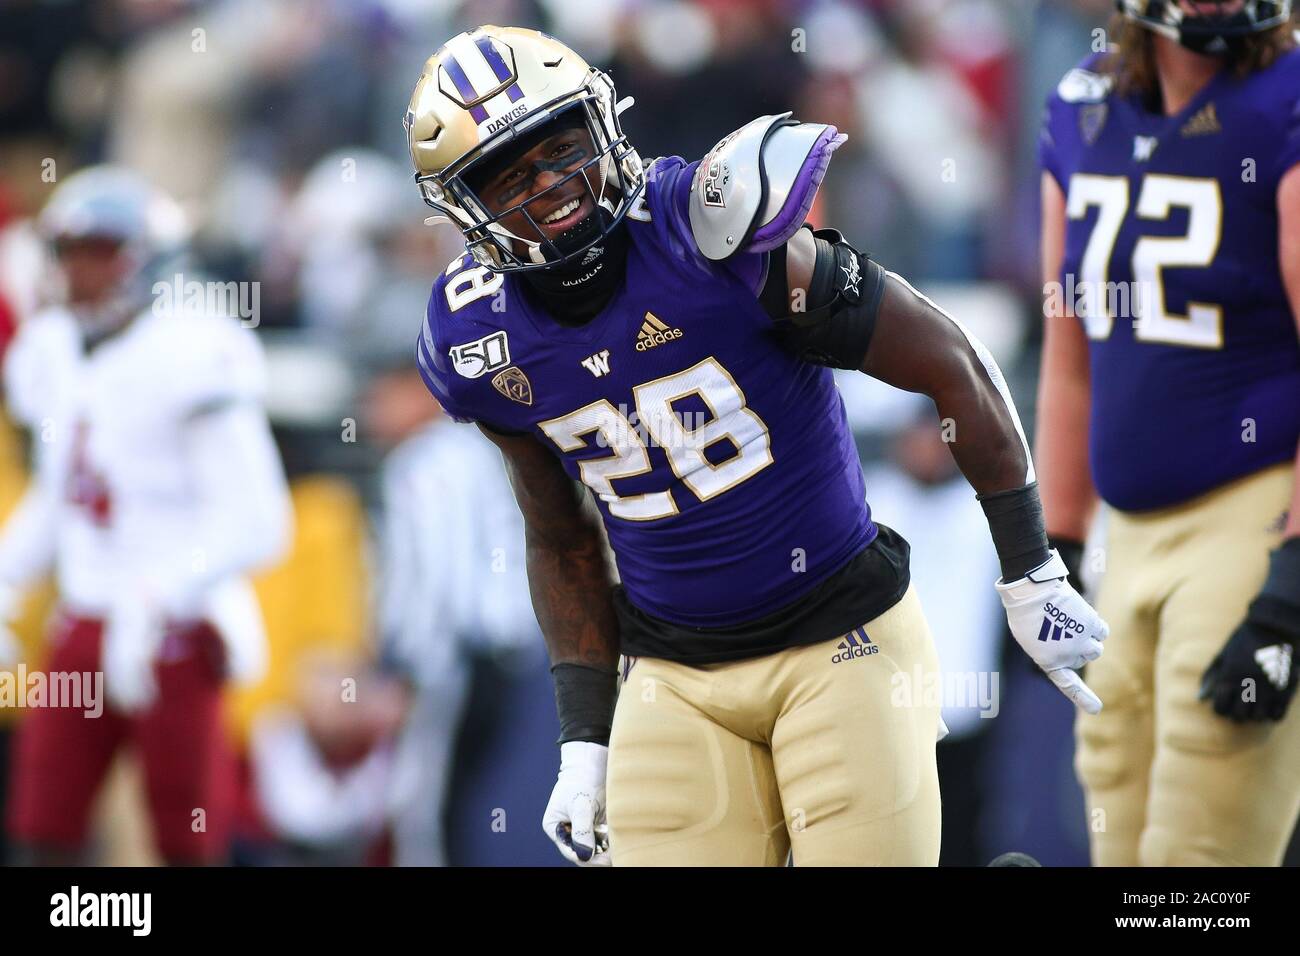 November 29, 2019: Washington Huskies running back Richard Newton (28) celebrates during a game between the Washington State Cougars and Washington Huskies at Husky Stadium in Seattle, WA for the 112th Apple Cup. The Huskies won 31-13 to win their seventh straight Apple Cup. Sean Brown/CSM Stock Photo